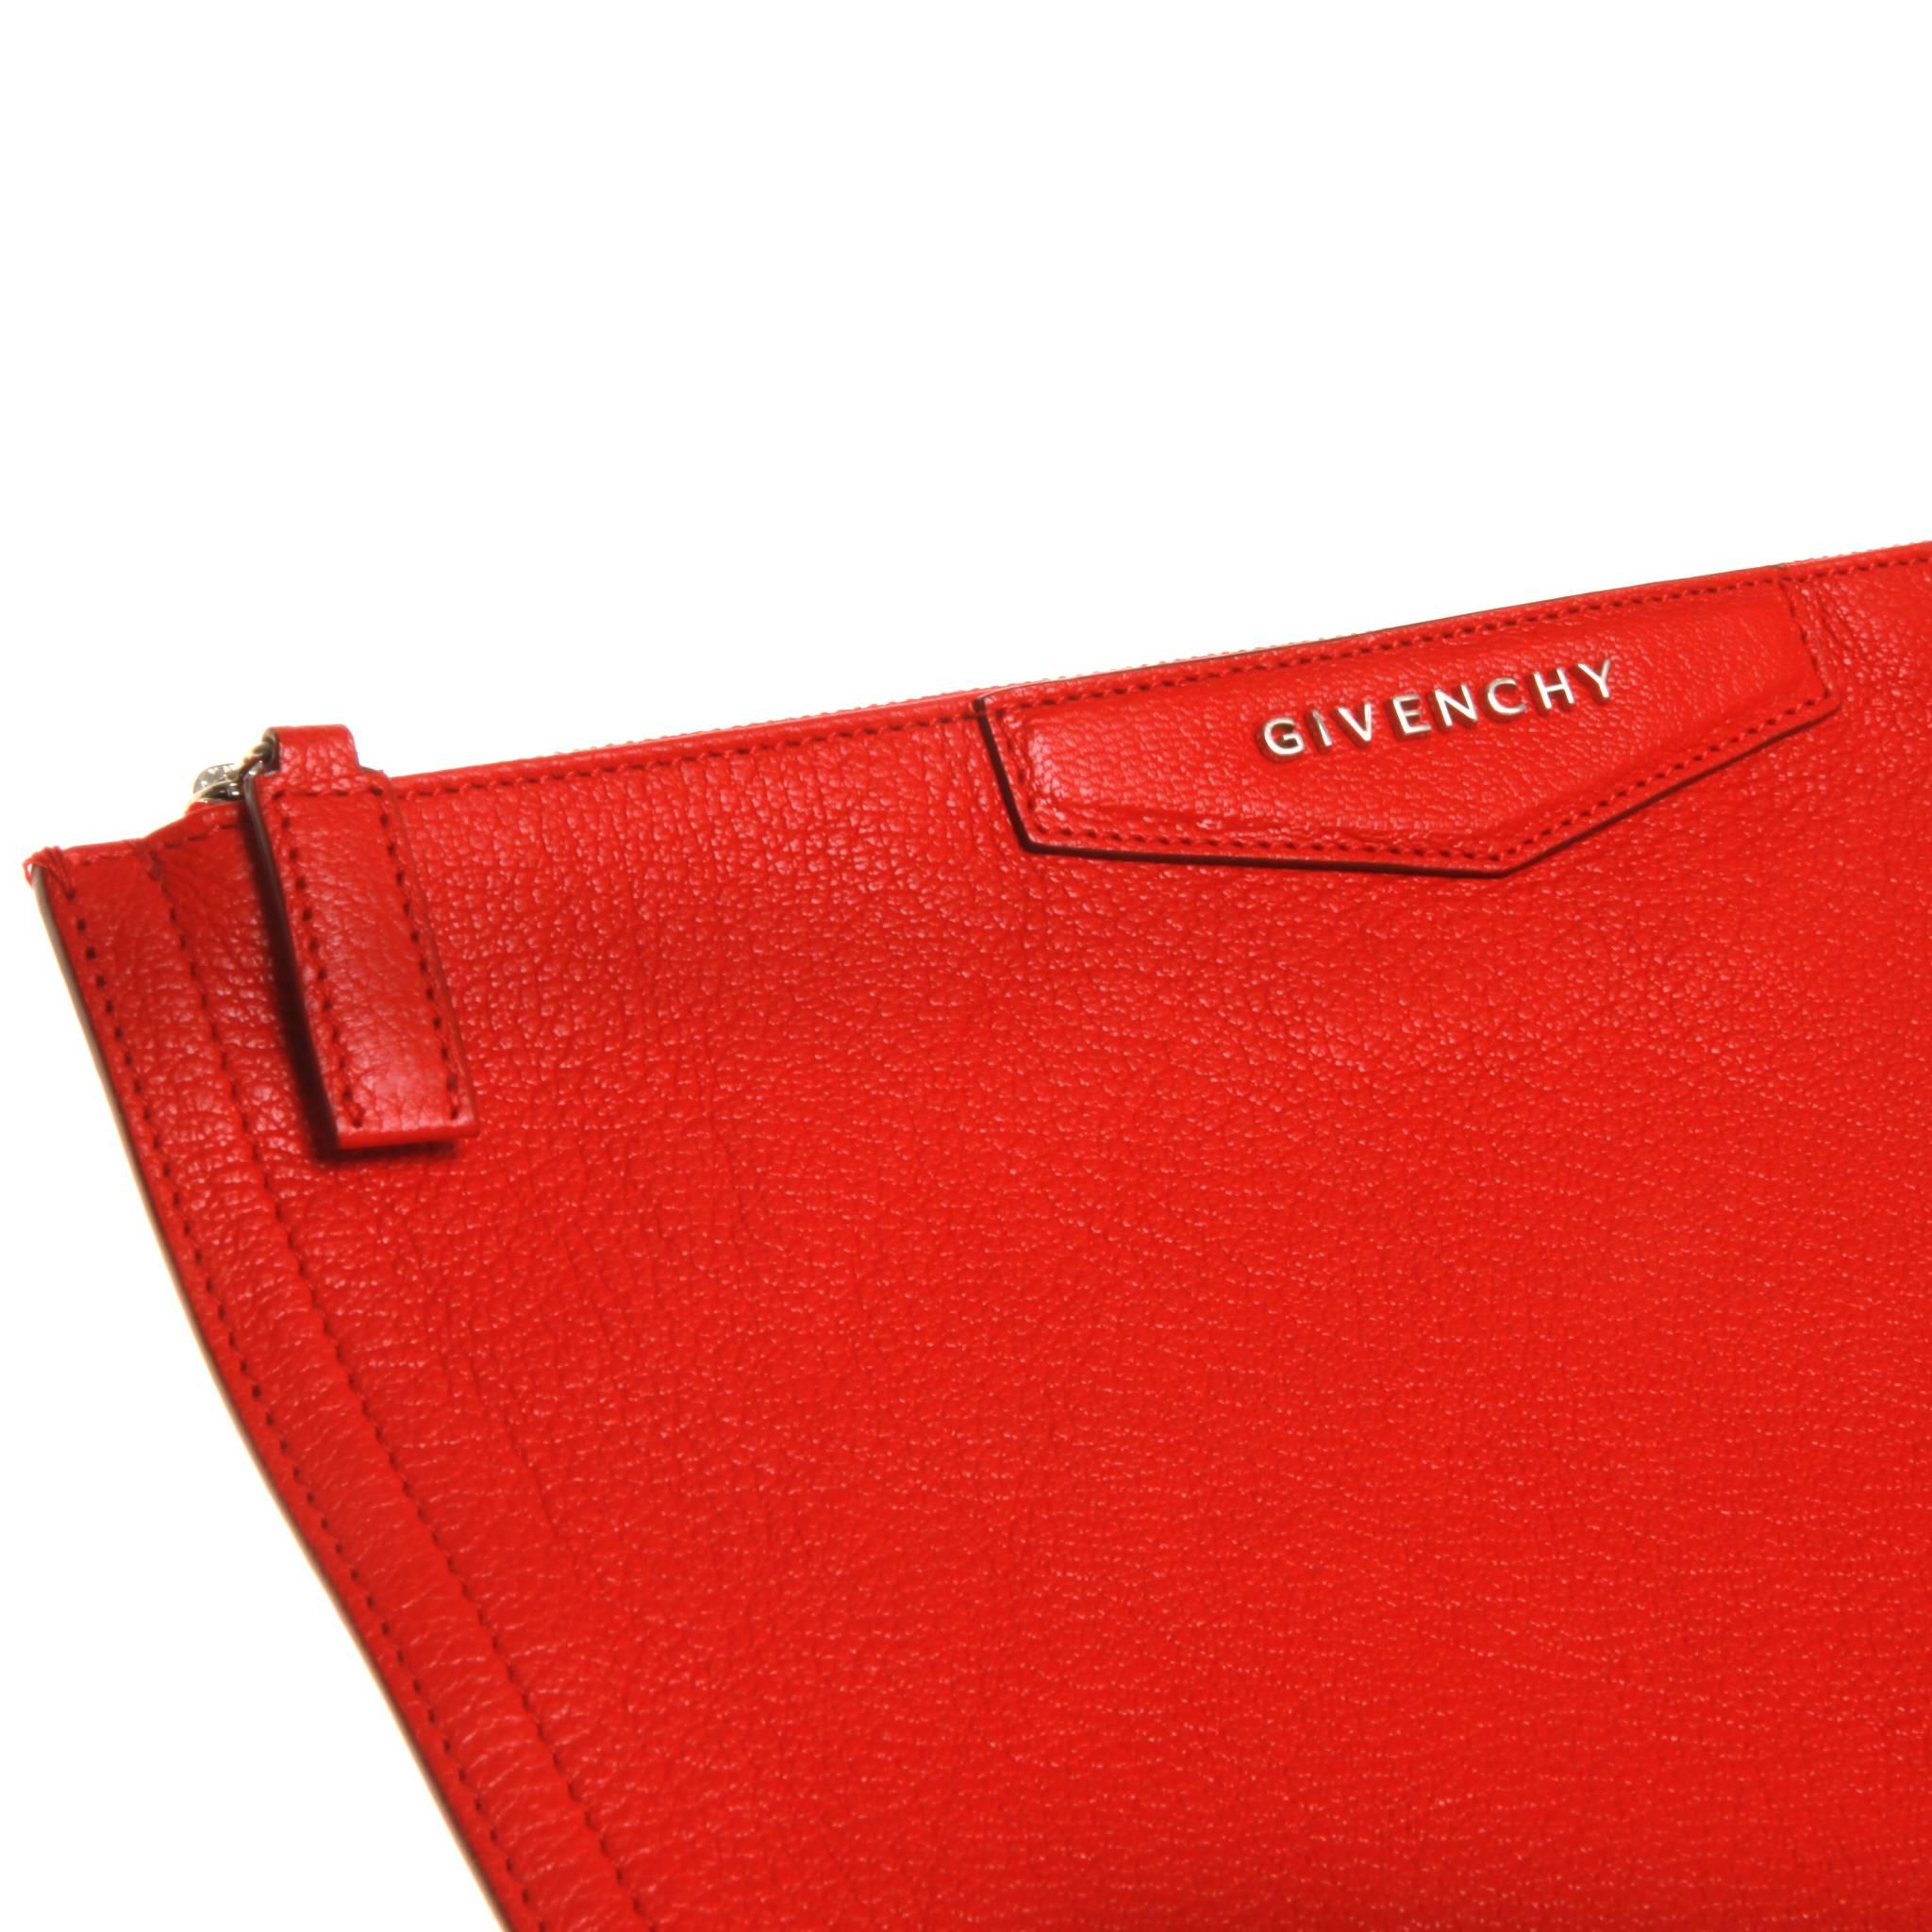 Scarlet red grained leather Givenchy Antigona pouch with silver-tone hardware, logo accent at front, beige woven canvas lining and zip closure at top. Includes dust bag. 